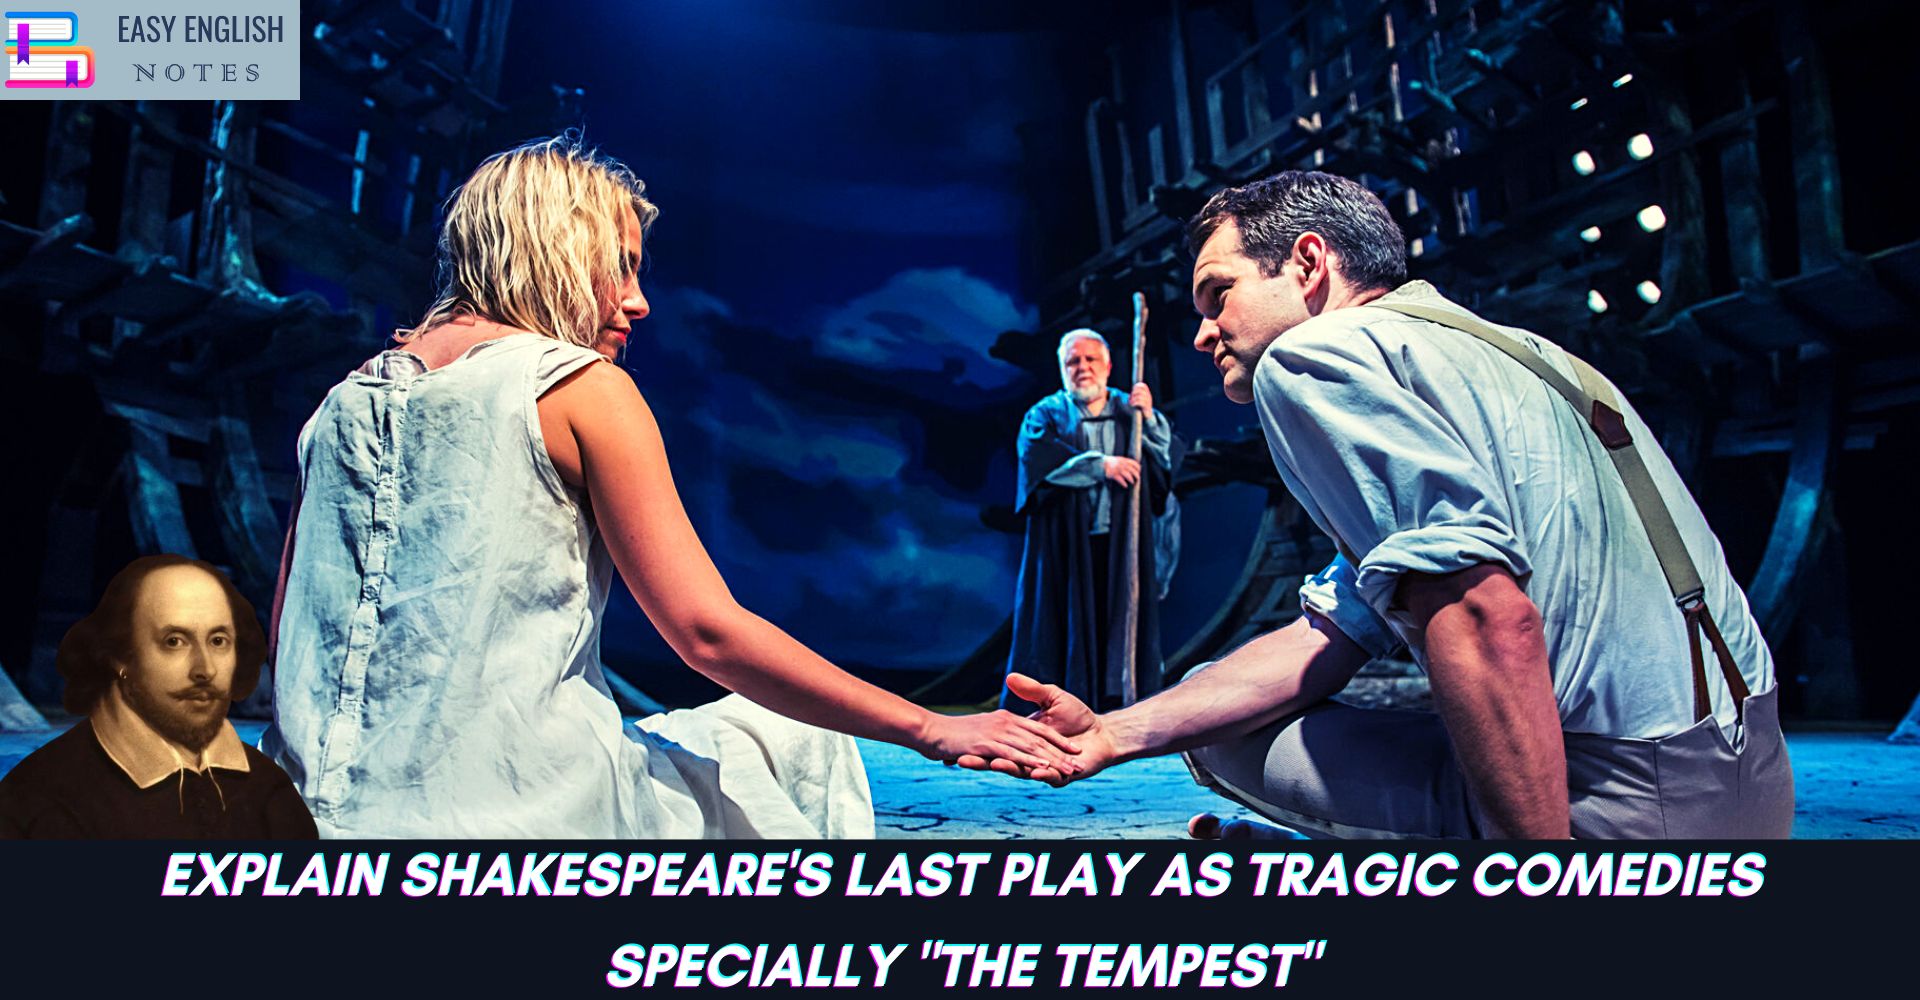 Explain Shakespeare's Last Play As Tragi Comedies Specially "The Tempest"